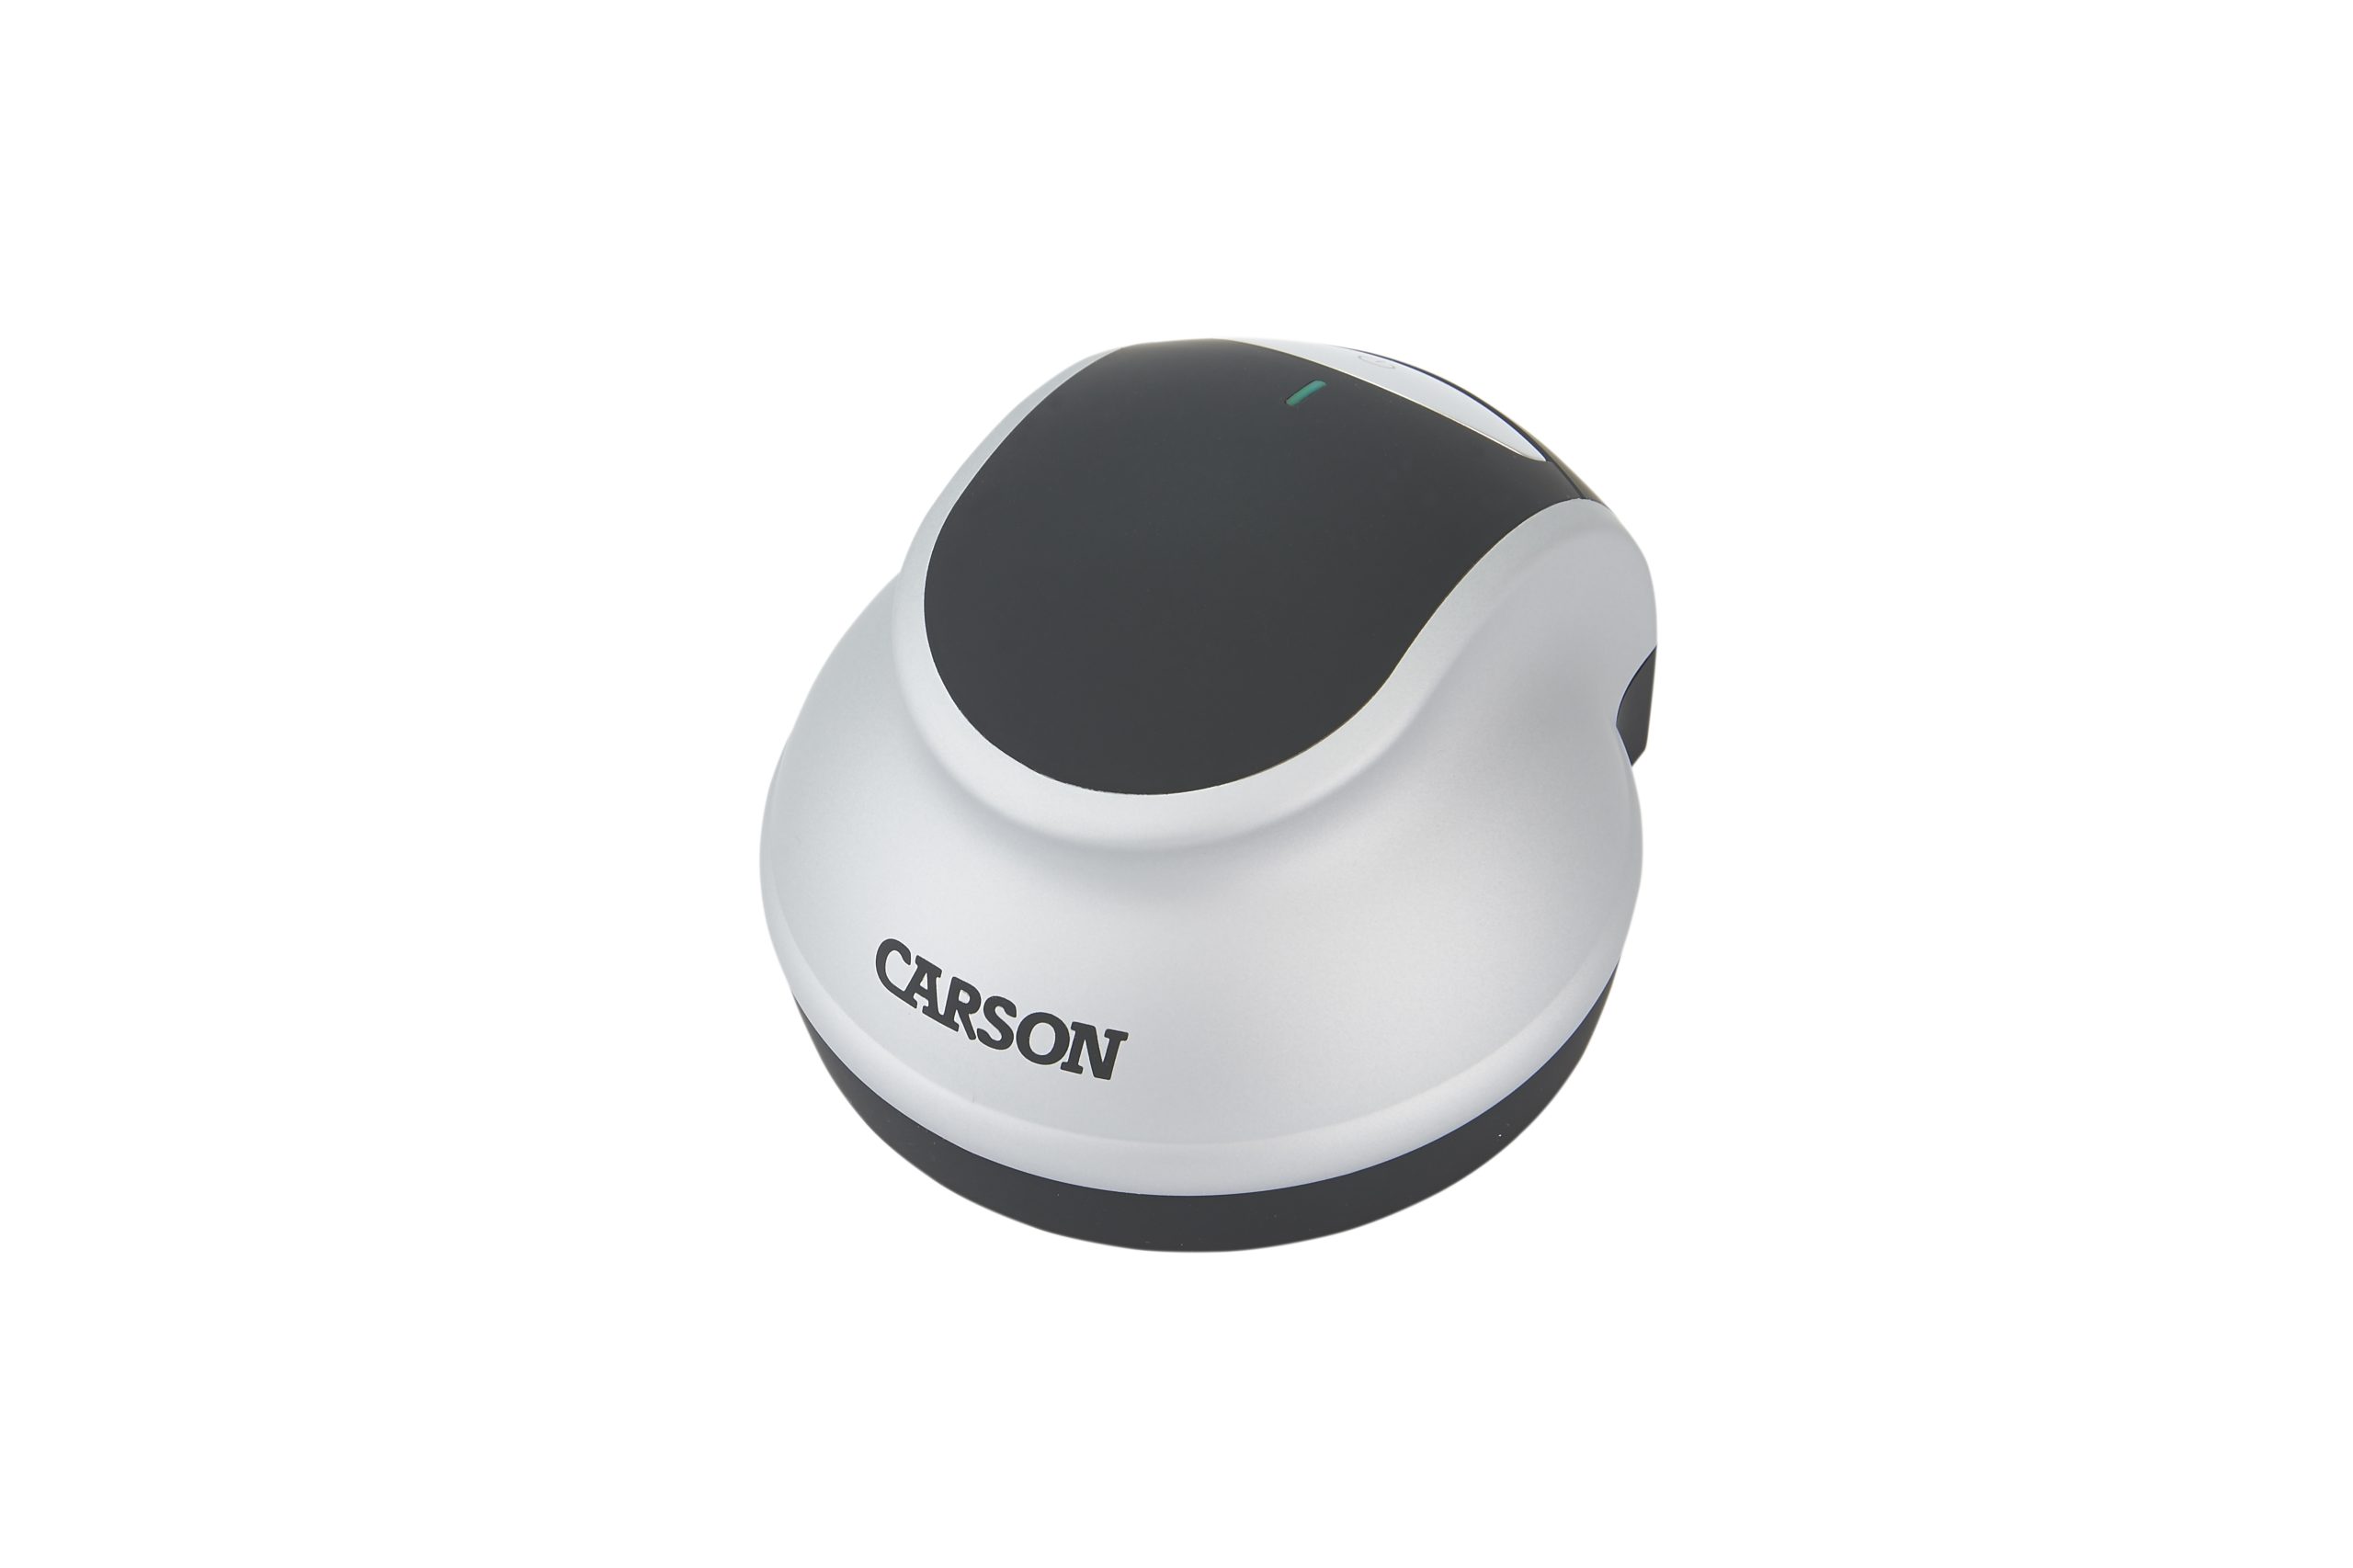 Carson VisorMag 2x Power +4.00 Diopters Clip-On Magnifying Lens for